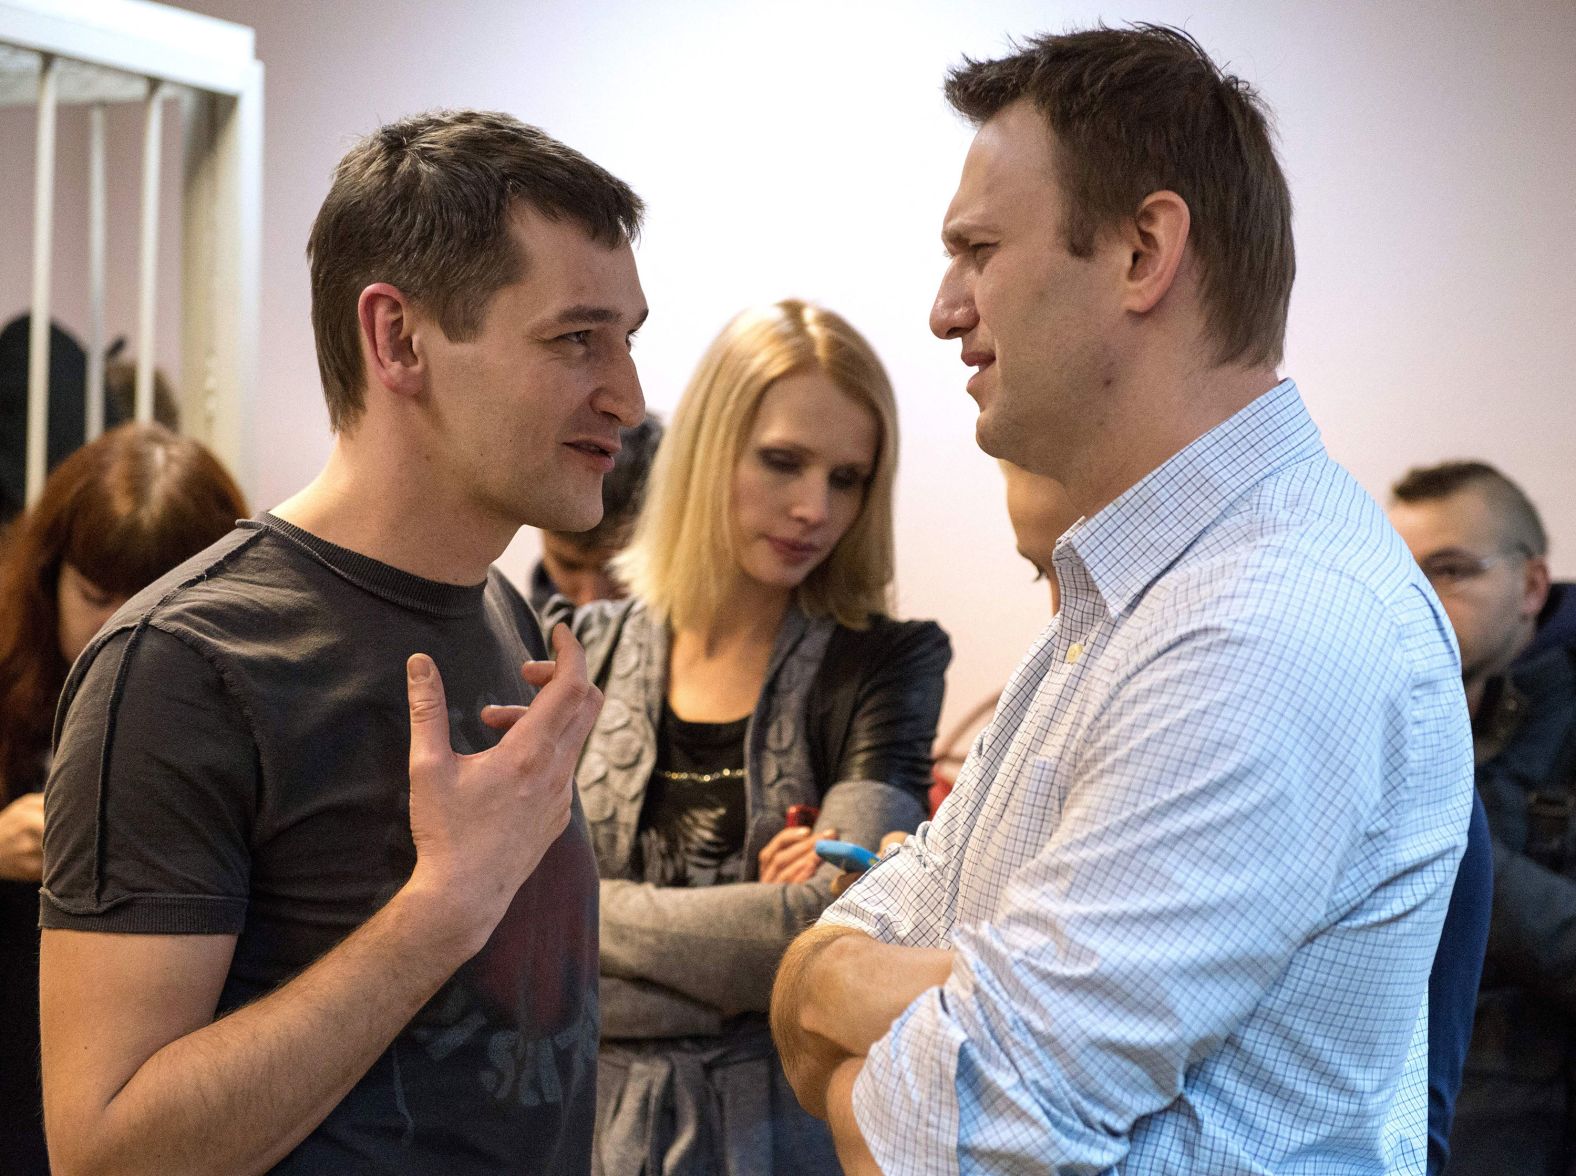 Navalny speaks to his brother and co-defendant, Oleg, as they attend the verdict announcement of their fraud trial at a court in Moscow in 2014. The Navalnys were accused of defrauding the Russian subsidiary of the French cosmetics company Yves Rocher. Alexey received a suspended sentence of three and a half years. Oleg was sentenced to three and a half years in prison and handcuffed in the courtroom. Alexey denounced it as political pressure and said he believed the conviction was politically motivated.